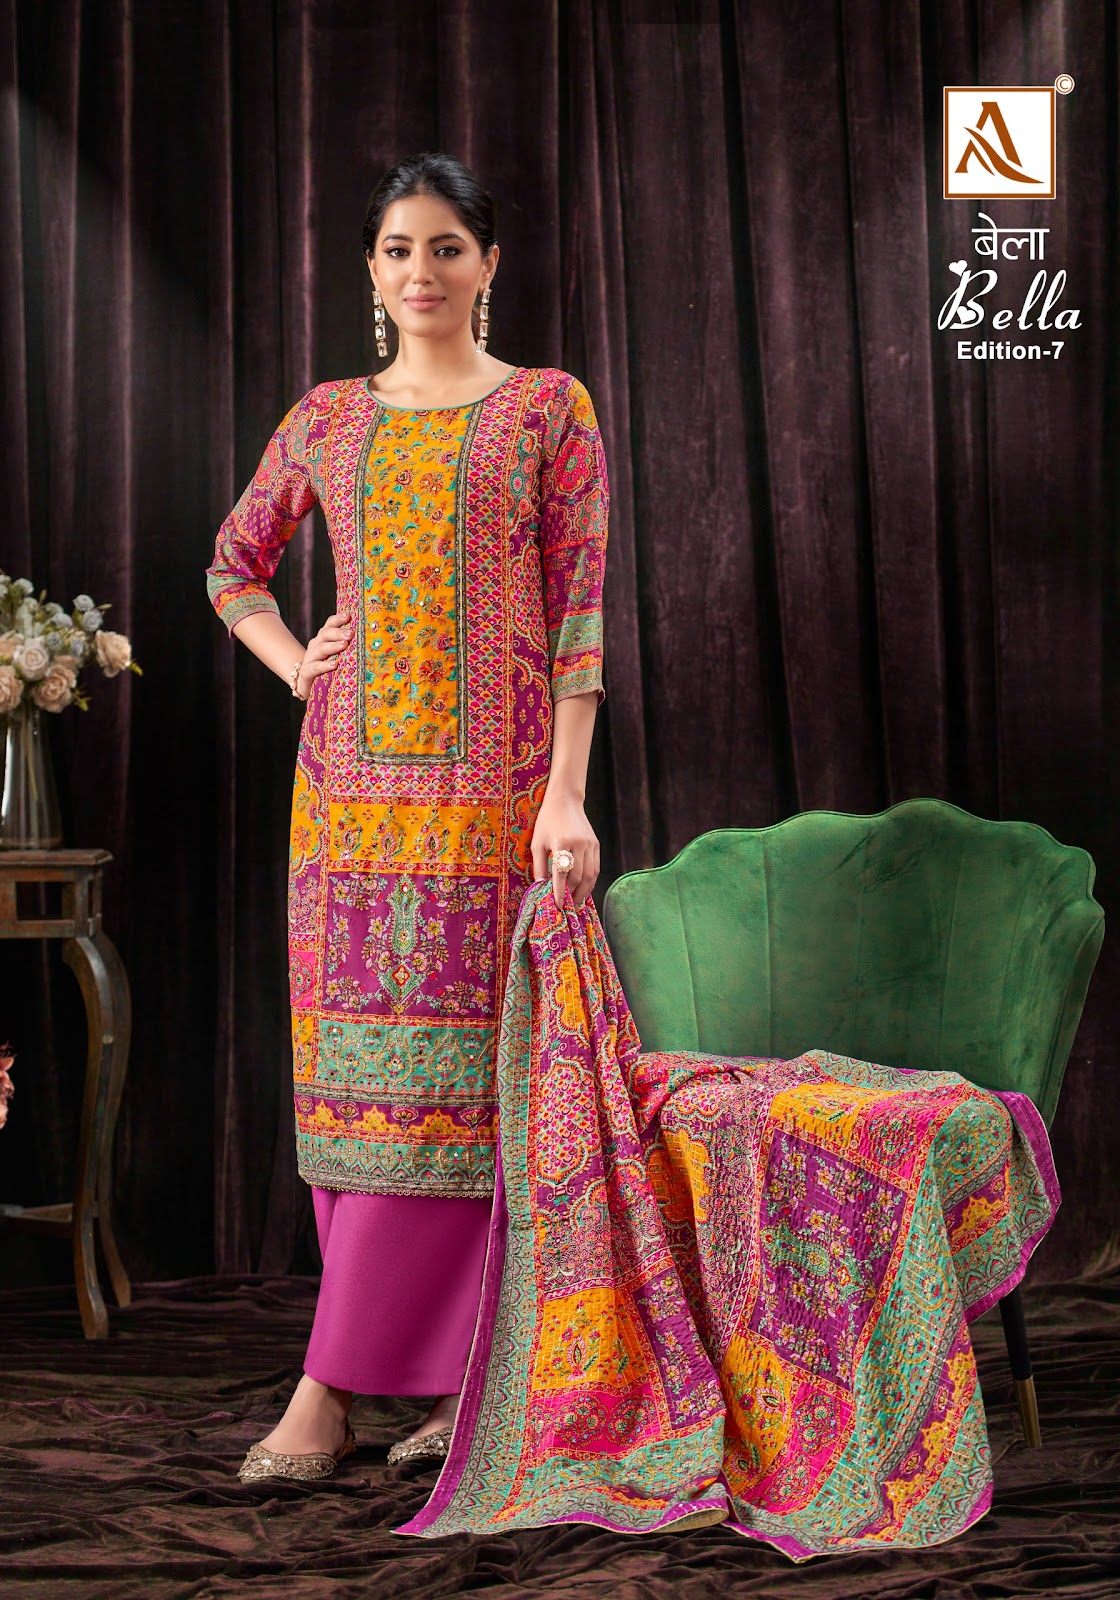 Bella Edition 7 Alok Pure Muslin Pant Style Suits Manufacturer Ahmedabad